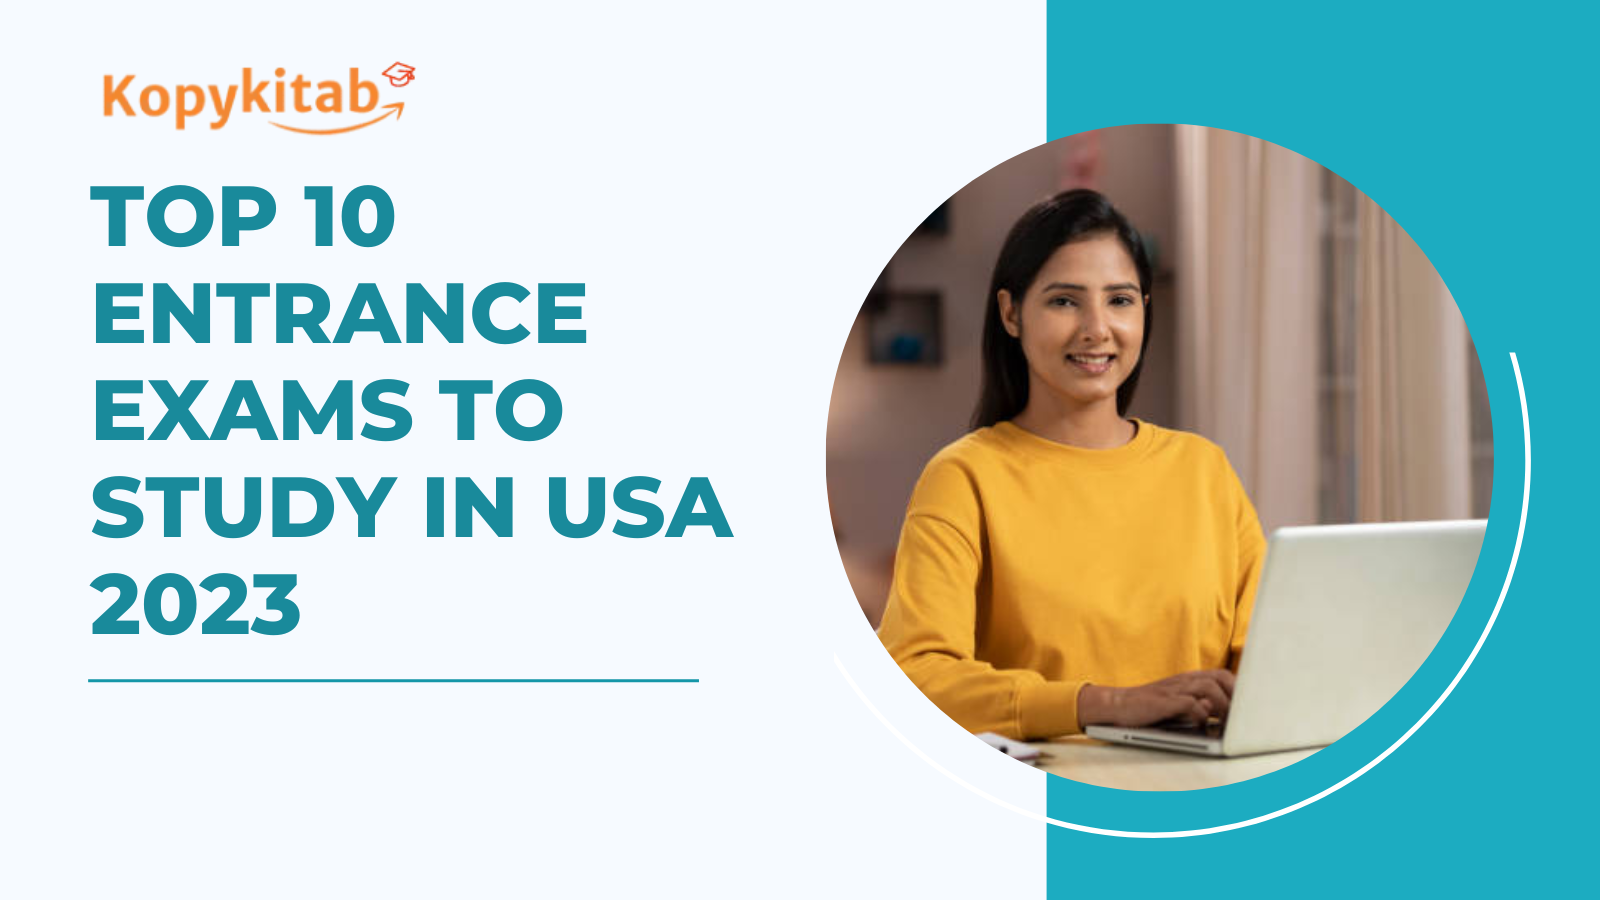 Top 10 Entrance Exams to Study in USA 2023